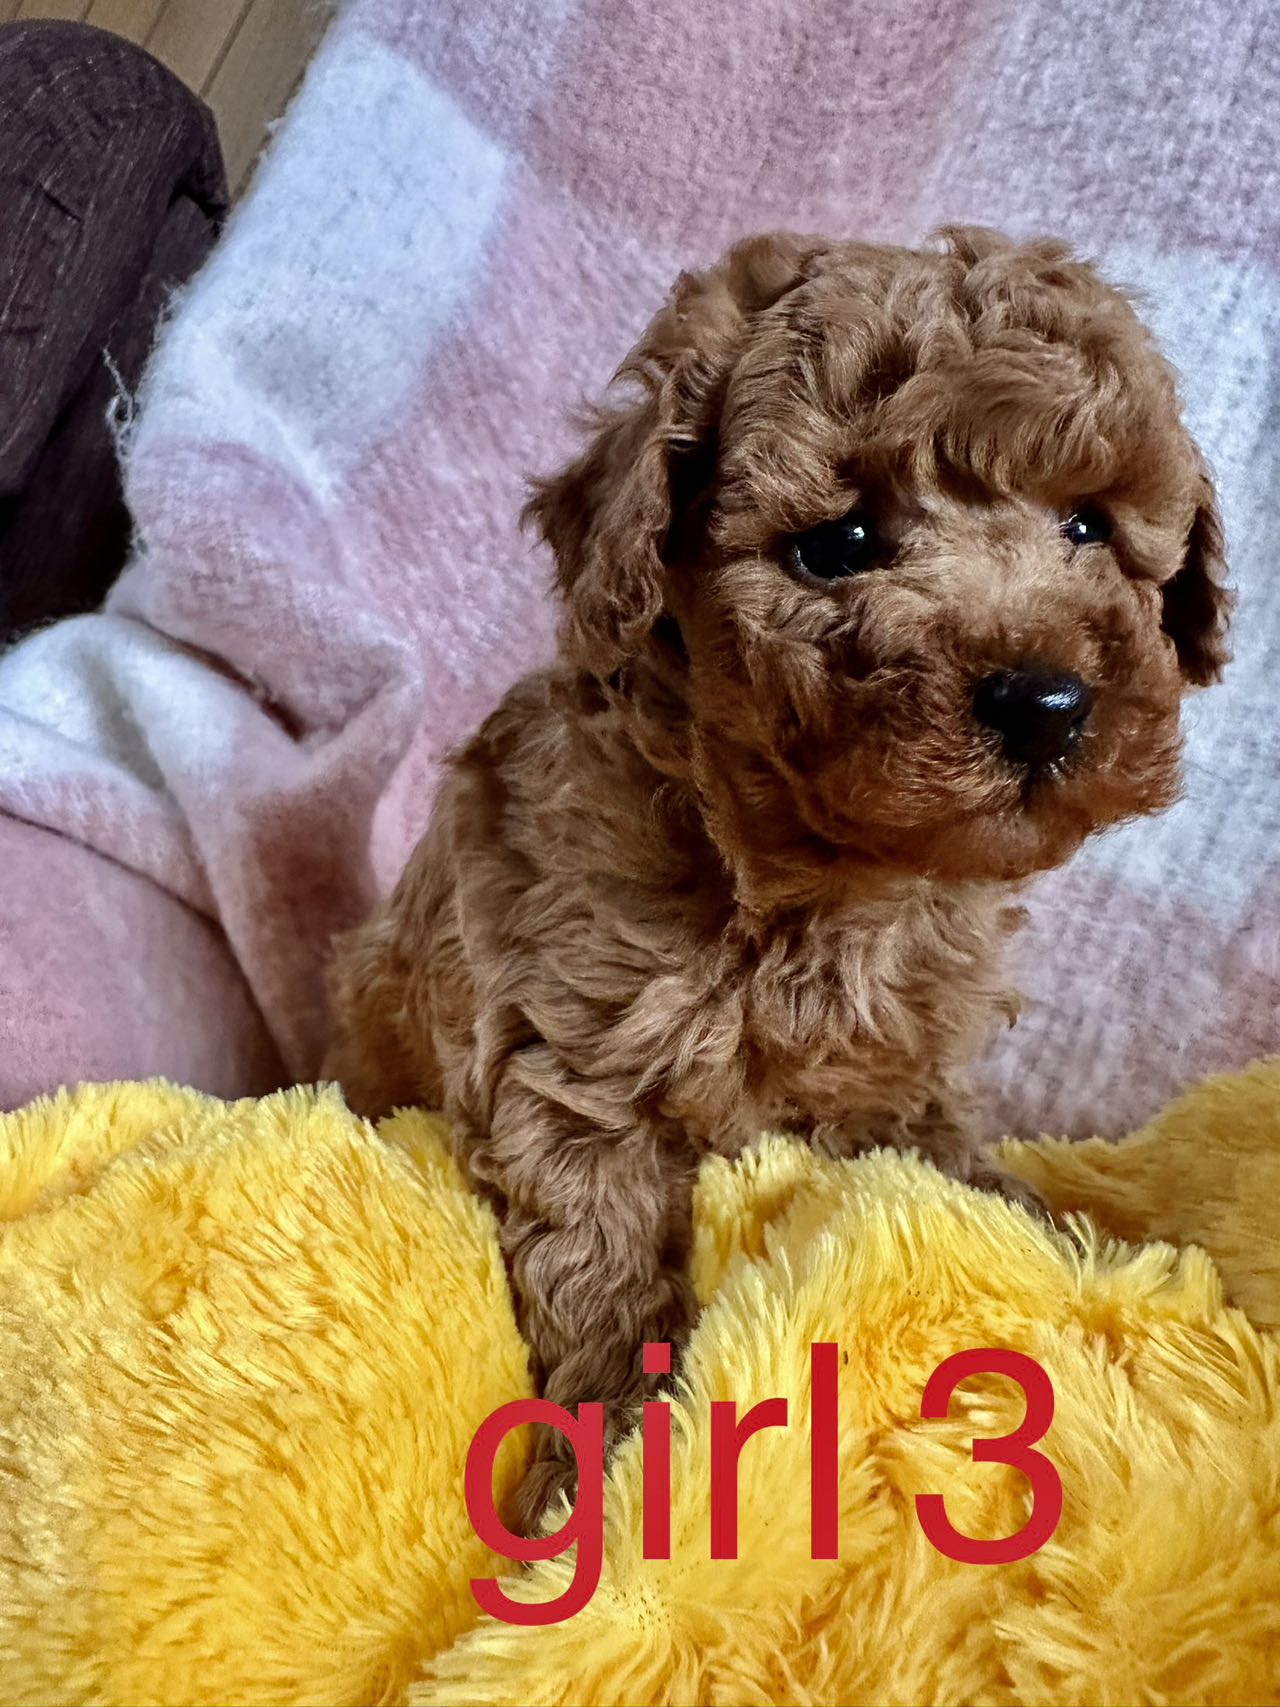 Adorable Purebred Toy Poodle Puppies for Sale - Ready to Go Home!